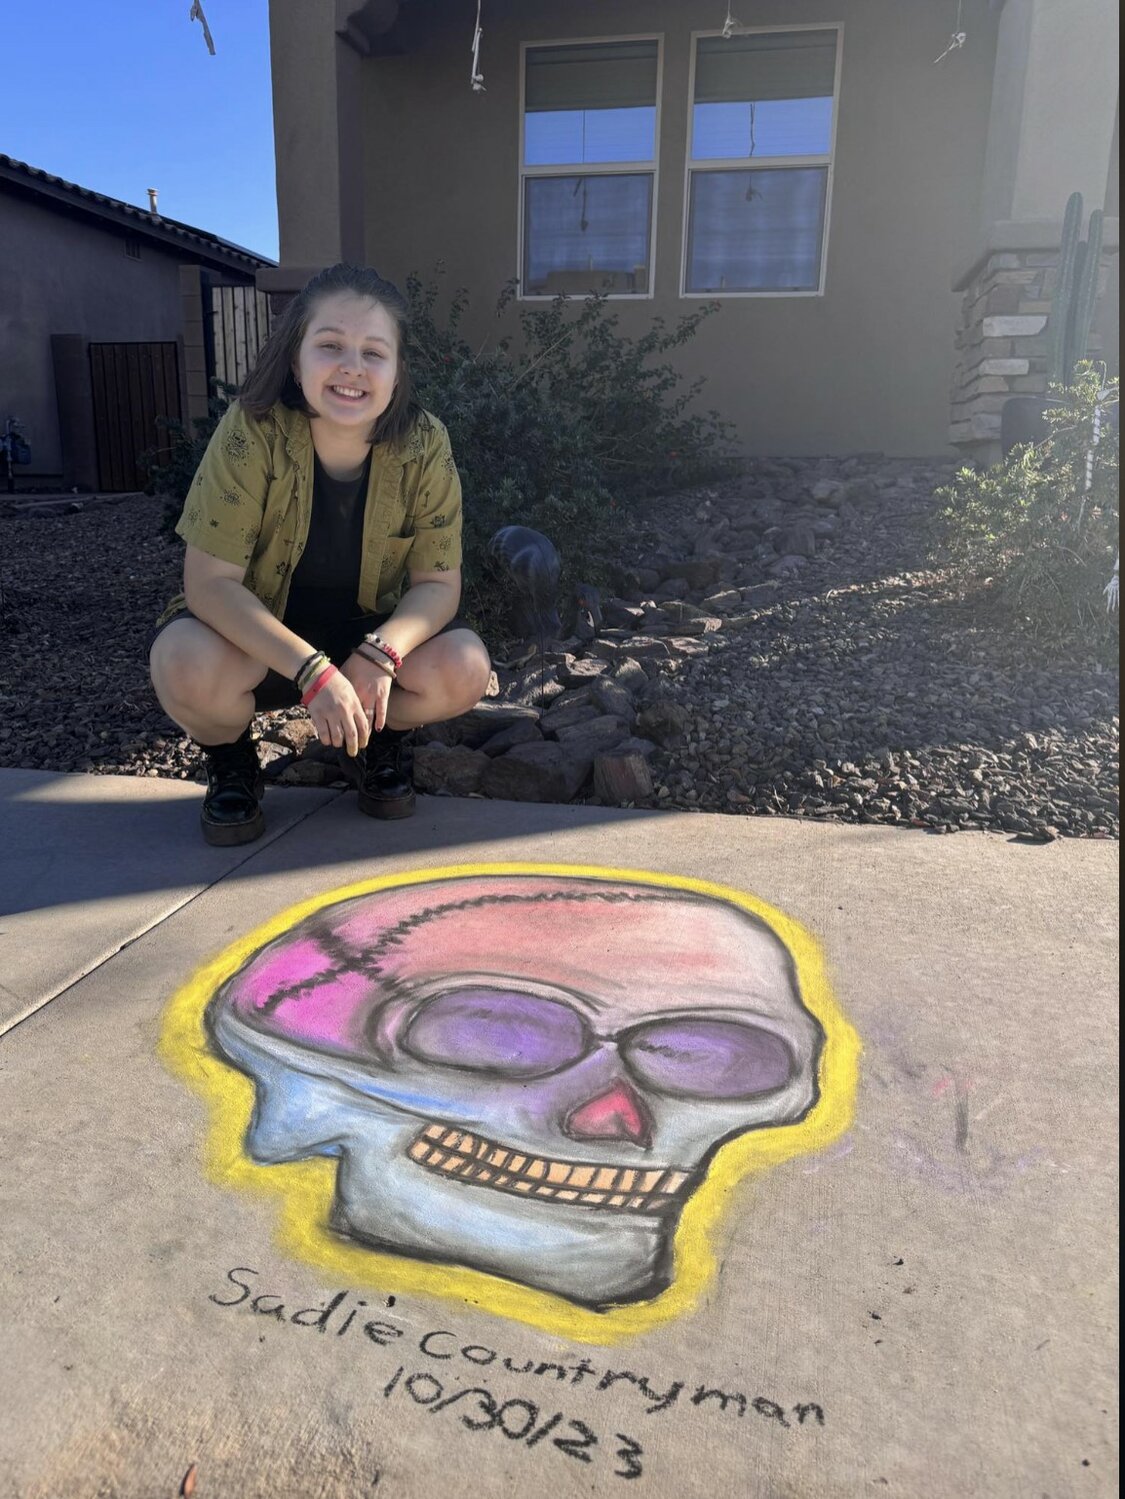 Sadie Countryman won the 13-to-17-year-old age group for her drawing of a skull.